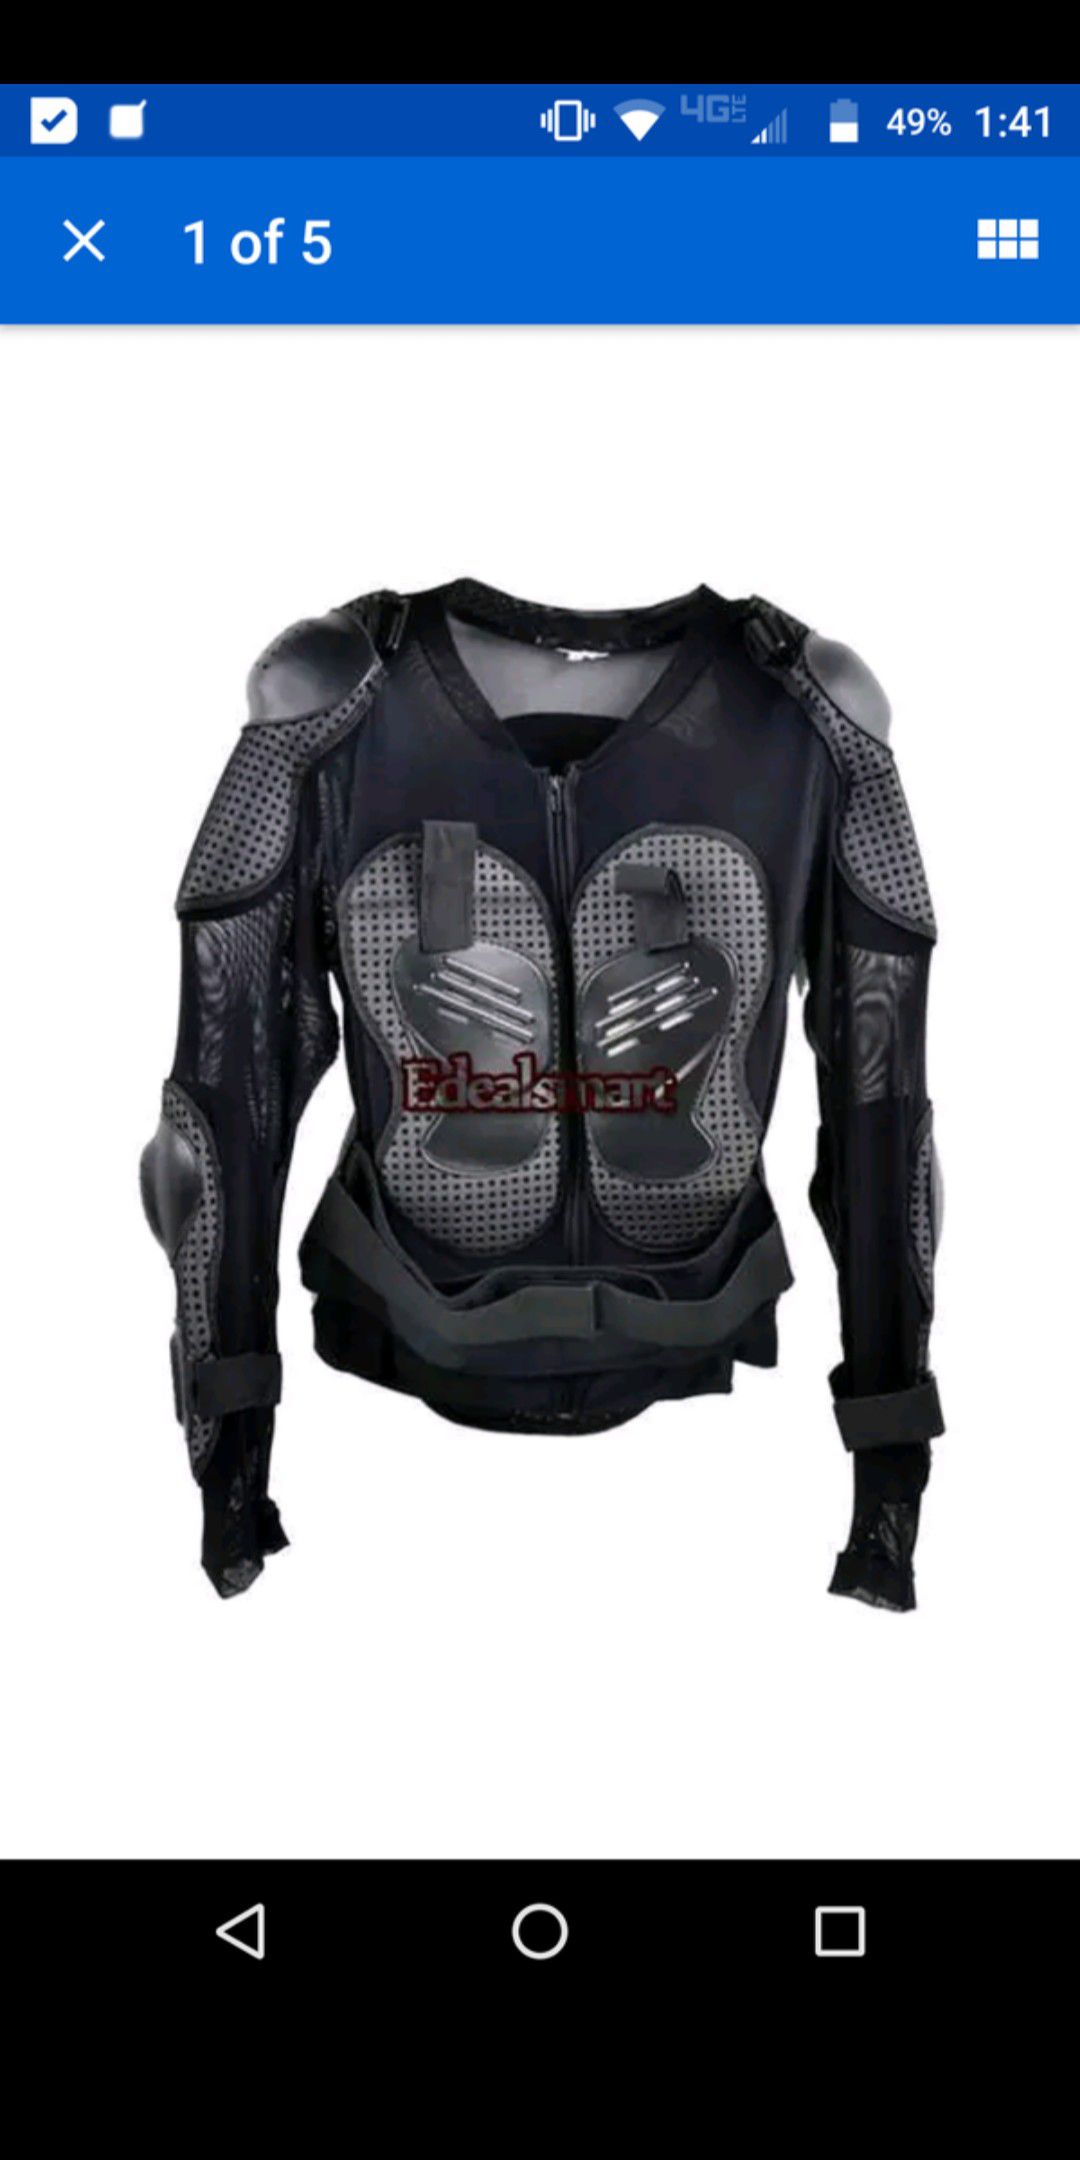 Breathable Motorcycle safety padding protector gear